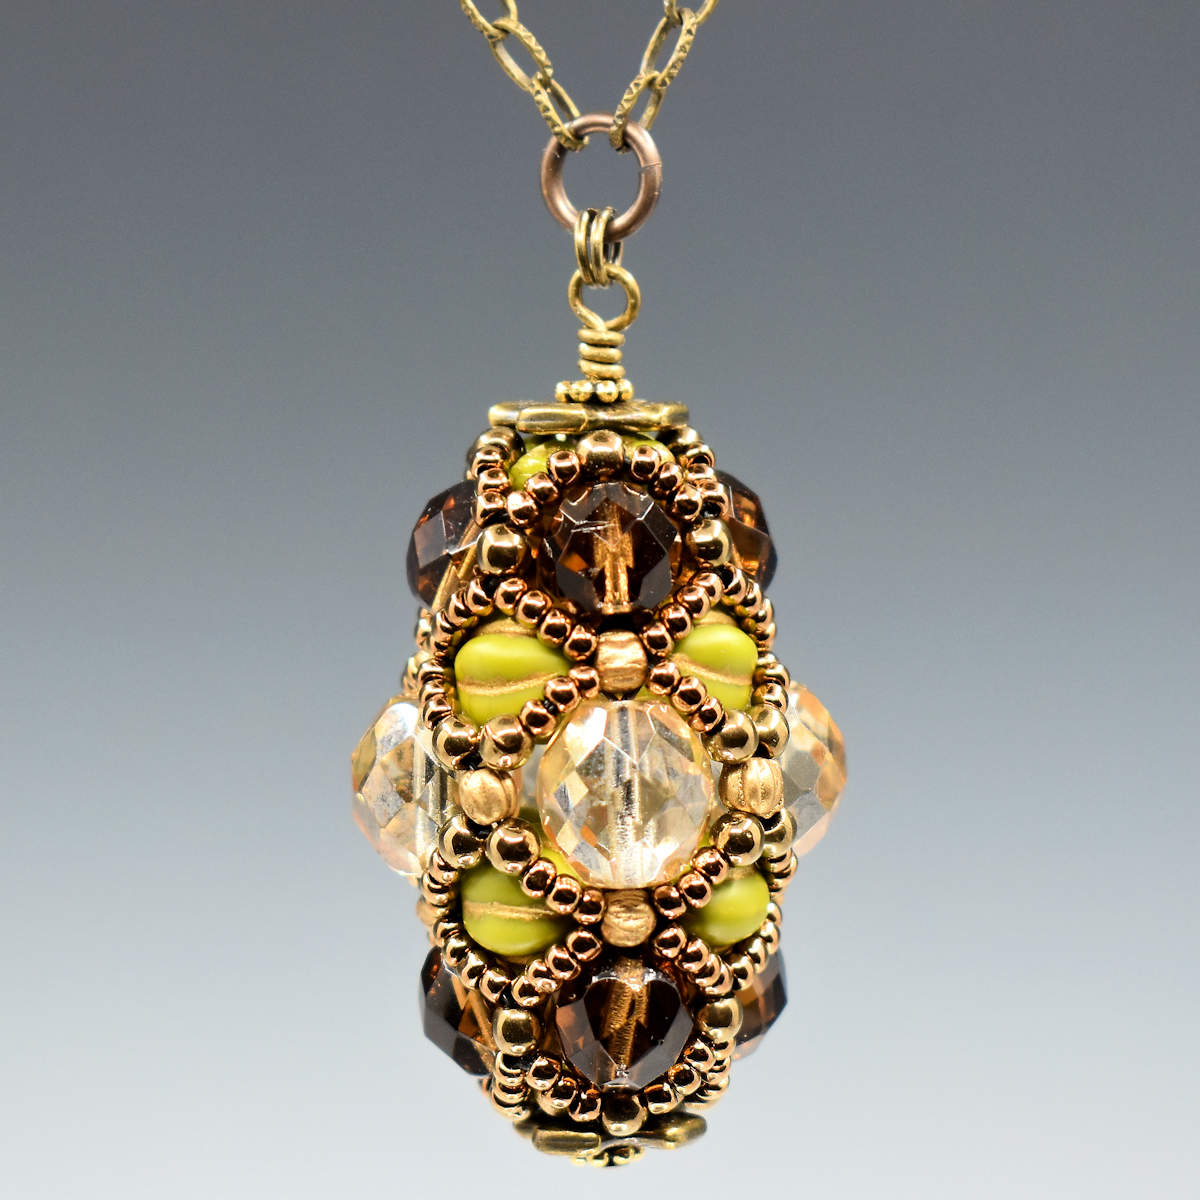 An egg shaped pendant hangs from a golden chain in front of a gray background. The pendant has a wide center section formed from transparent, faceted champagne colored beads, then a layer of matte avocado beads, and another of dark amber. A netting of gold seed beads is overlaid, outlining all of the larger beads. 